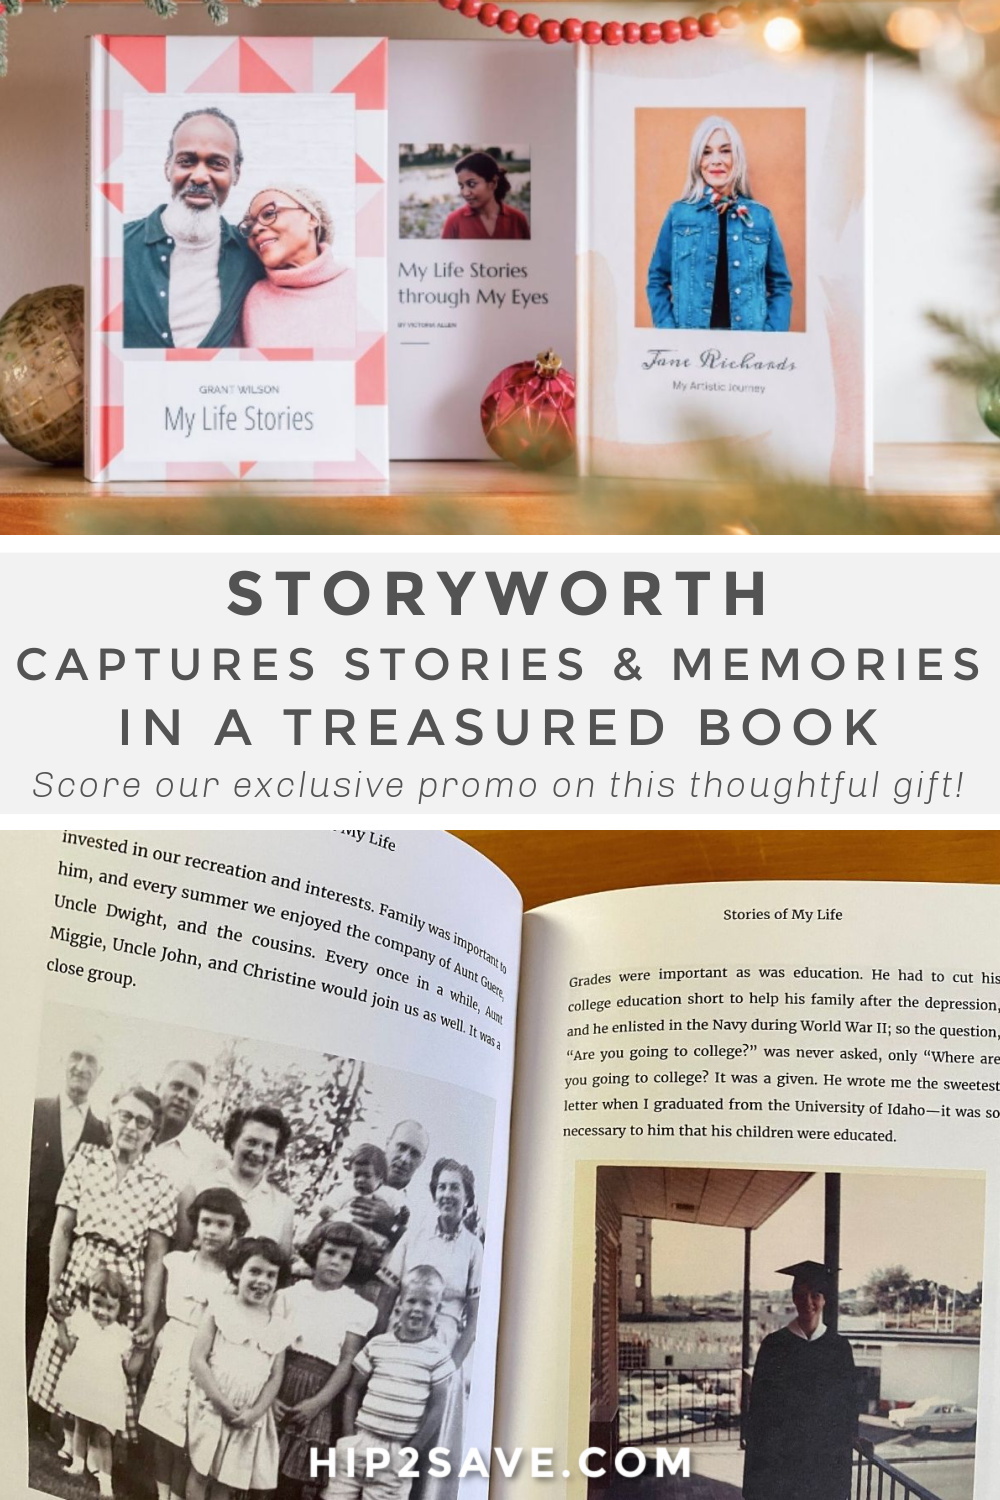 StoryWorth is the Most Meaningful Gift I've Given (+ 10 OFF)